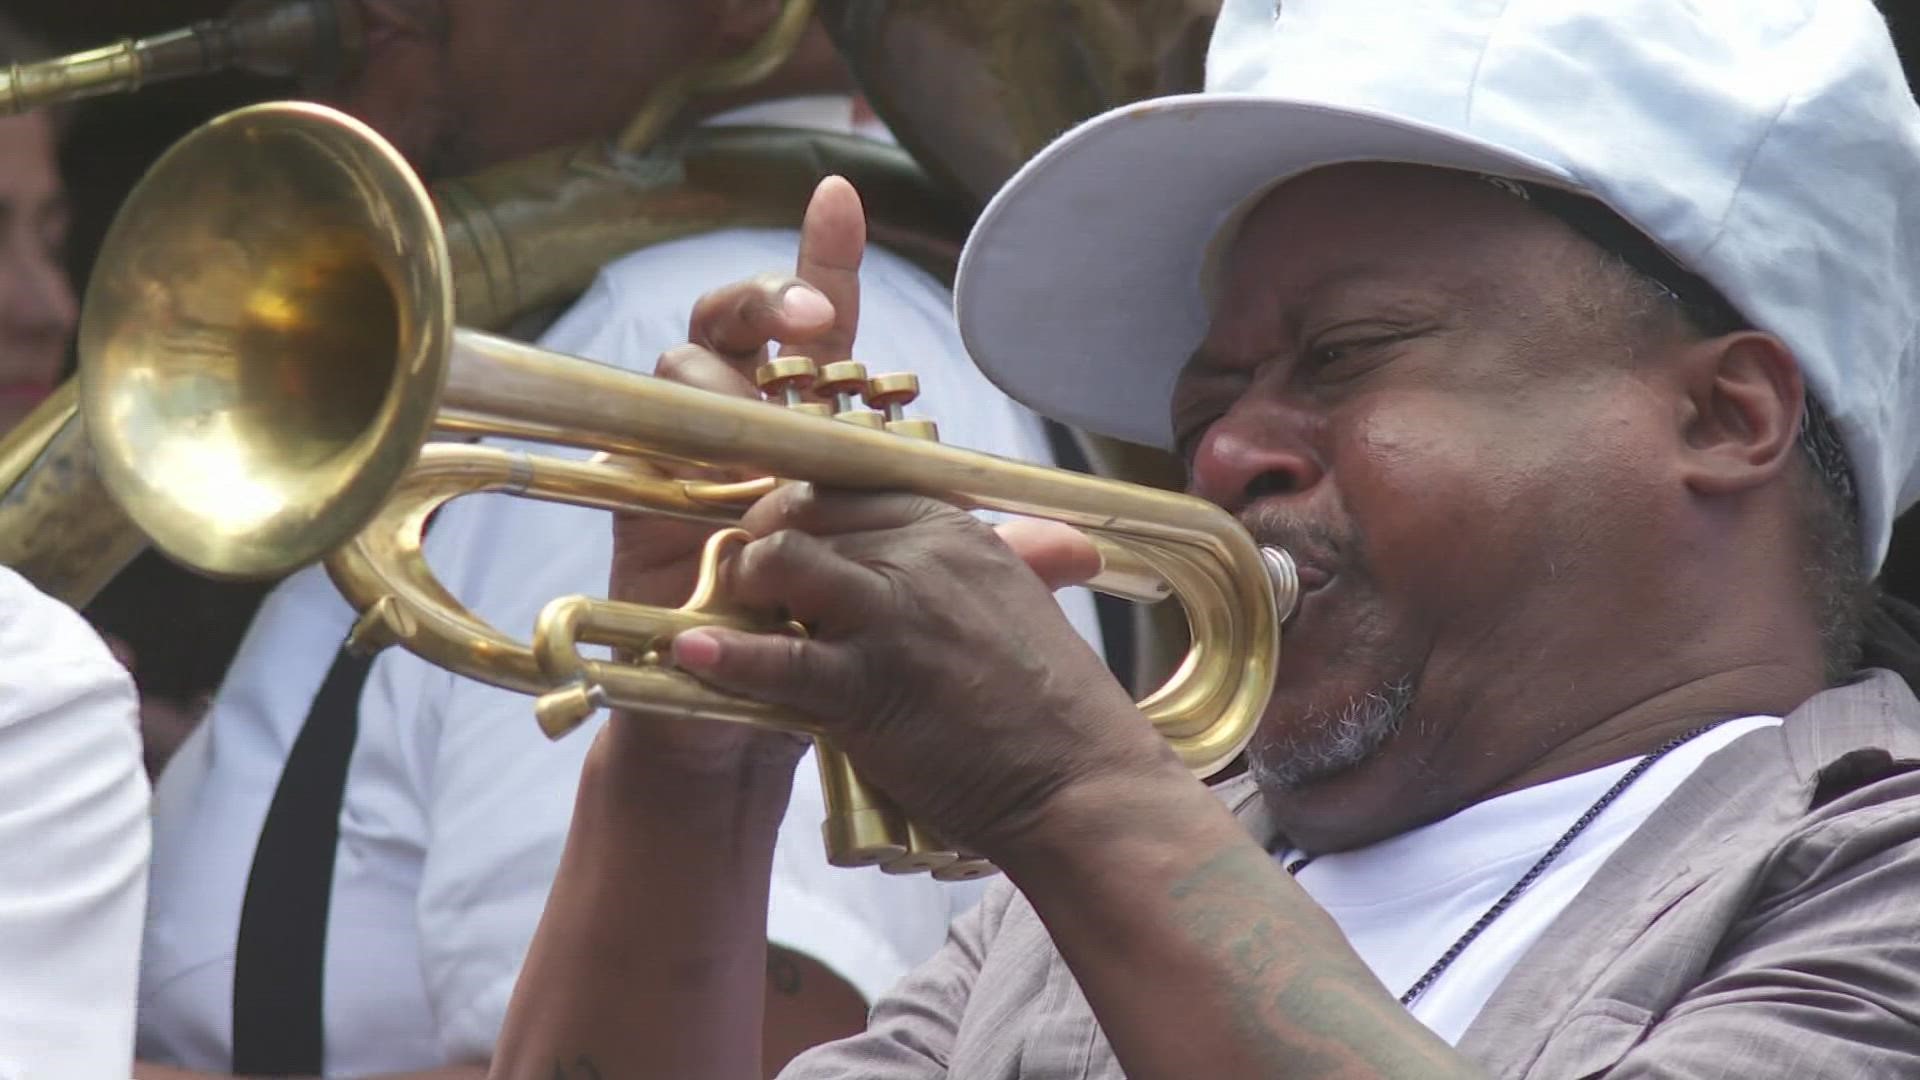 People can now plan their schedules for the first Jazz Fest in three years.